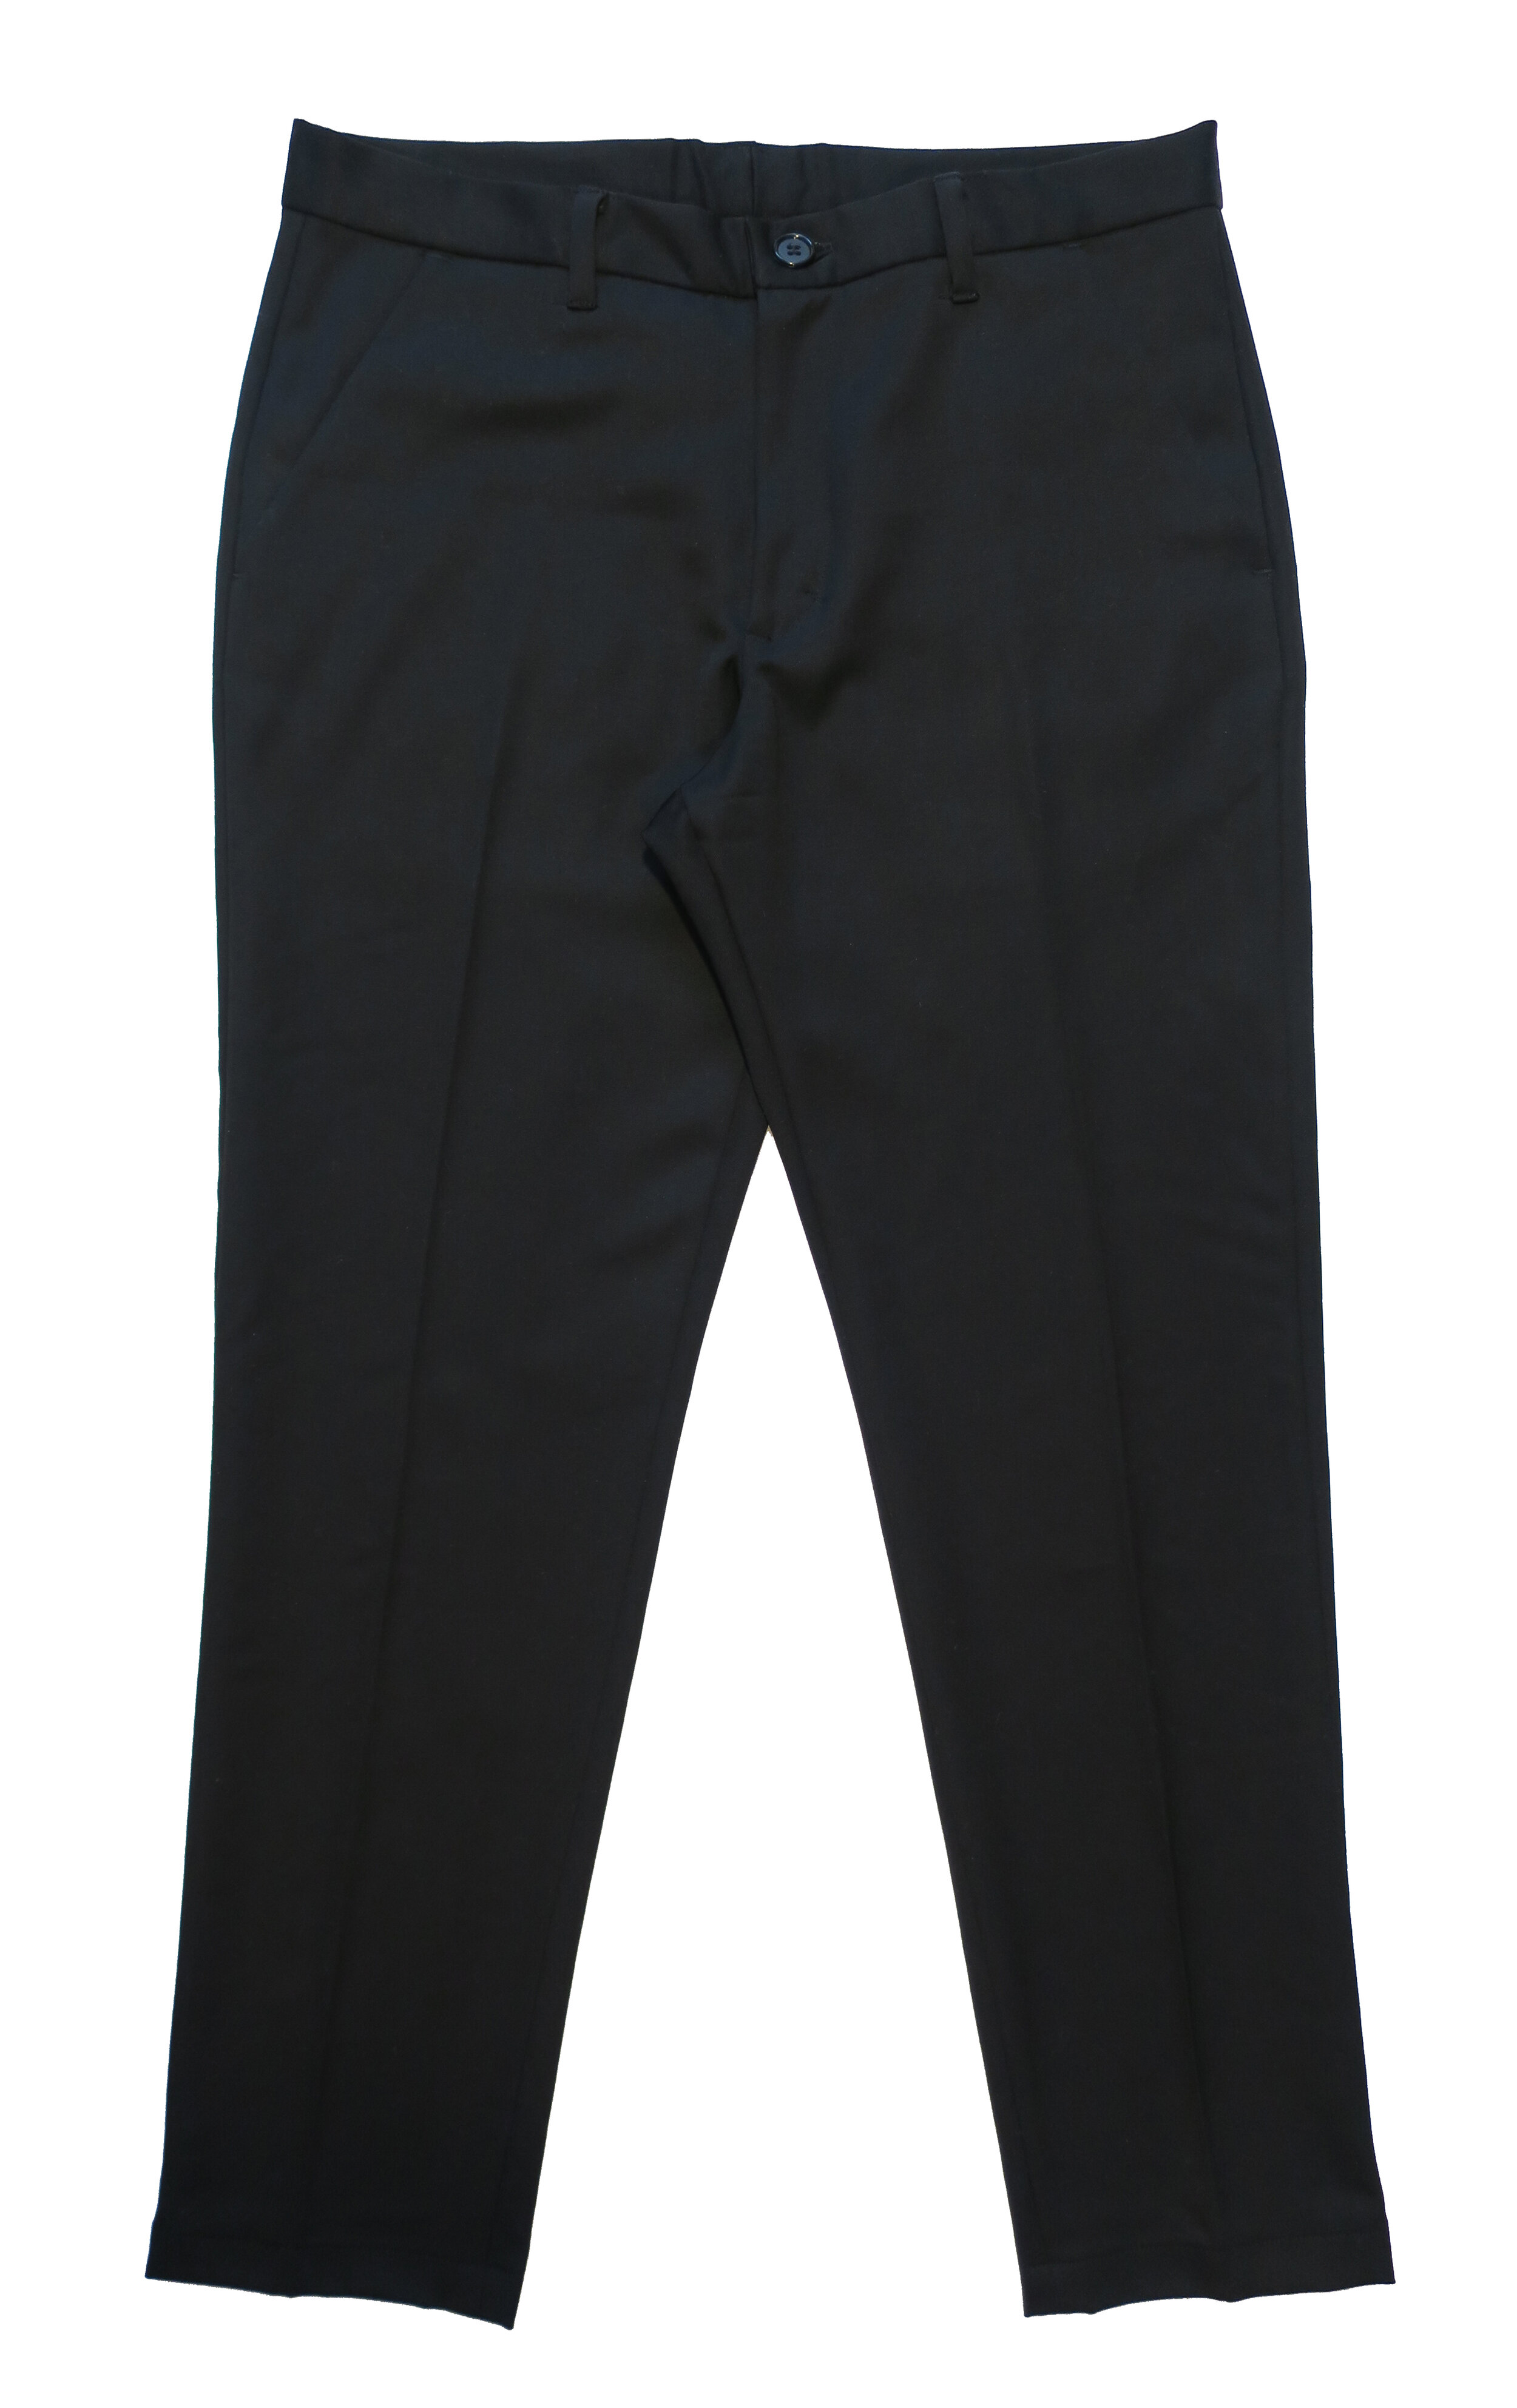 SS20 TAPERED PANT